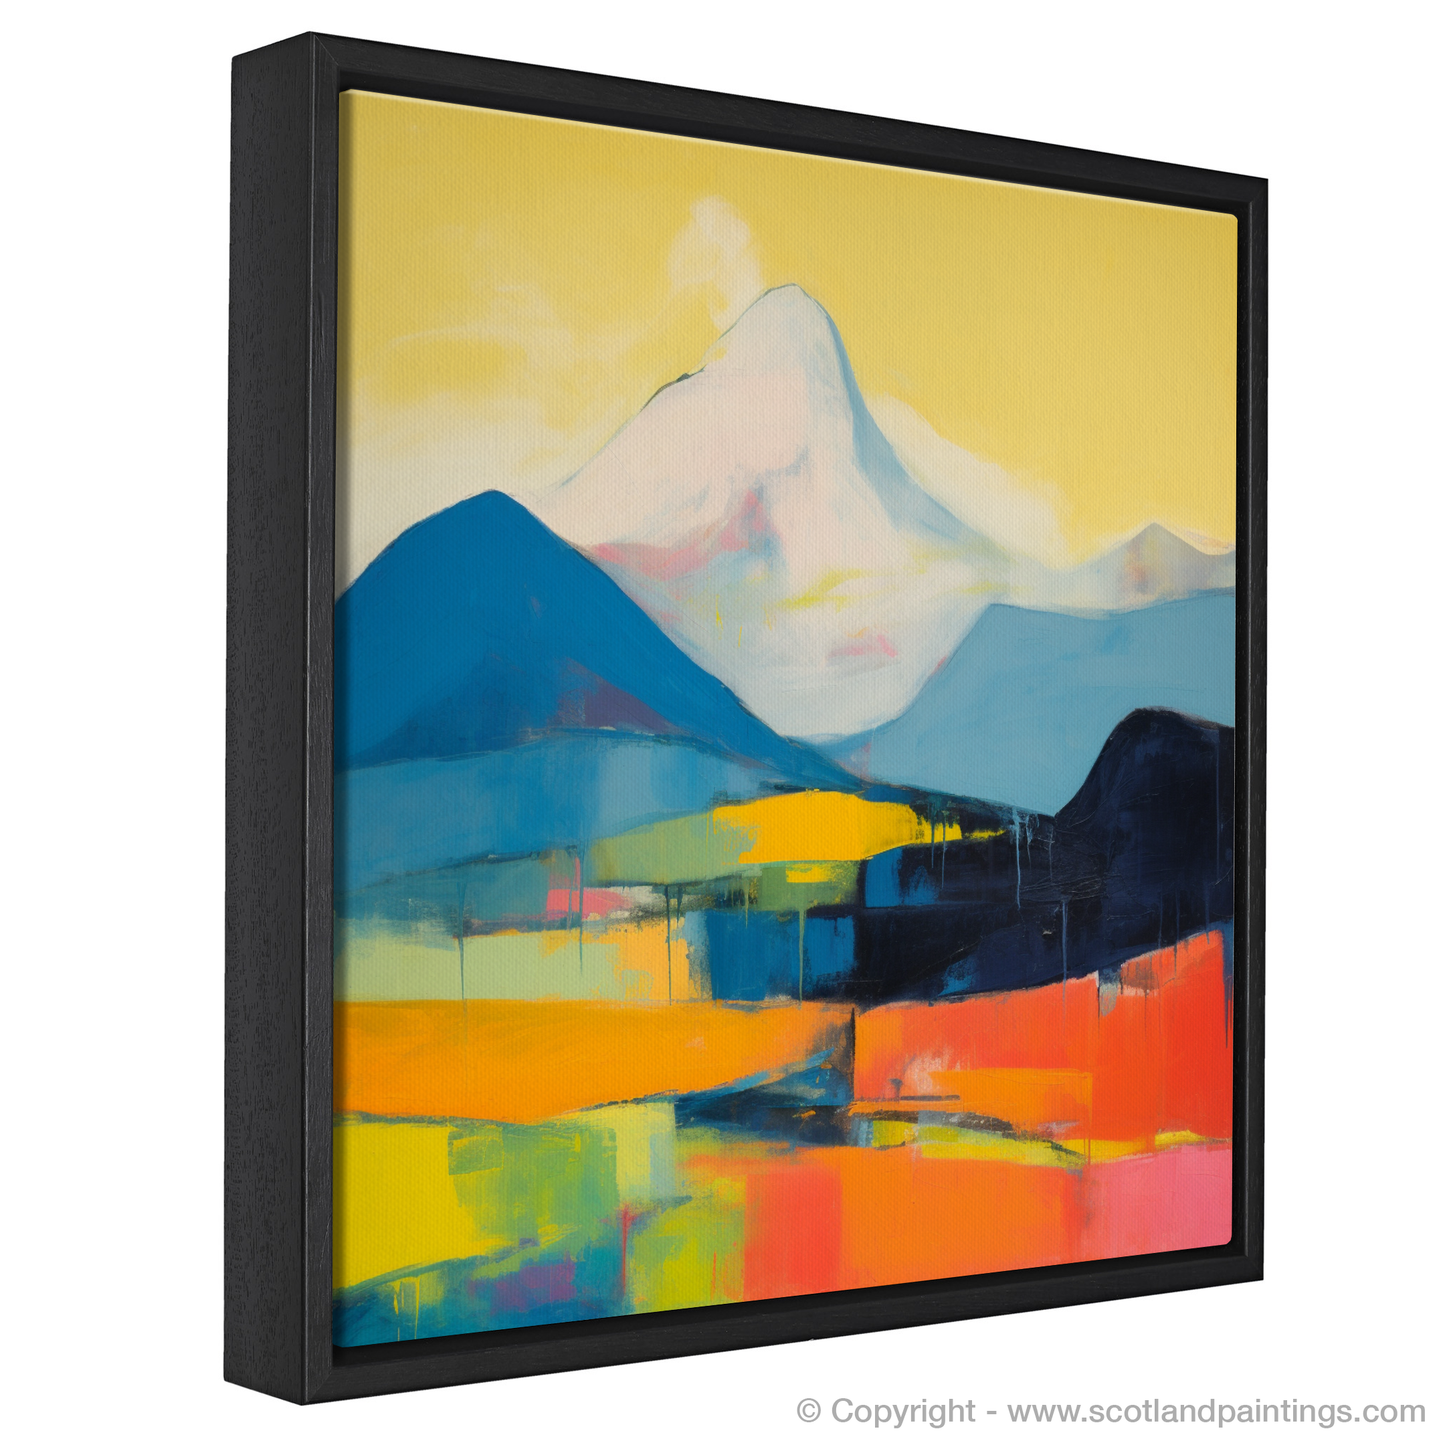 Painting and Art Print of Meall Garbh (Càrn Mairg) entitled "Abstract Highland Symphony: Meall Garbh Unveiled".